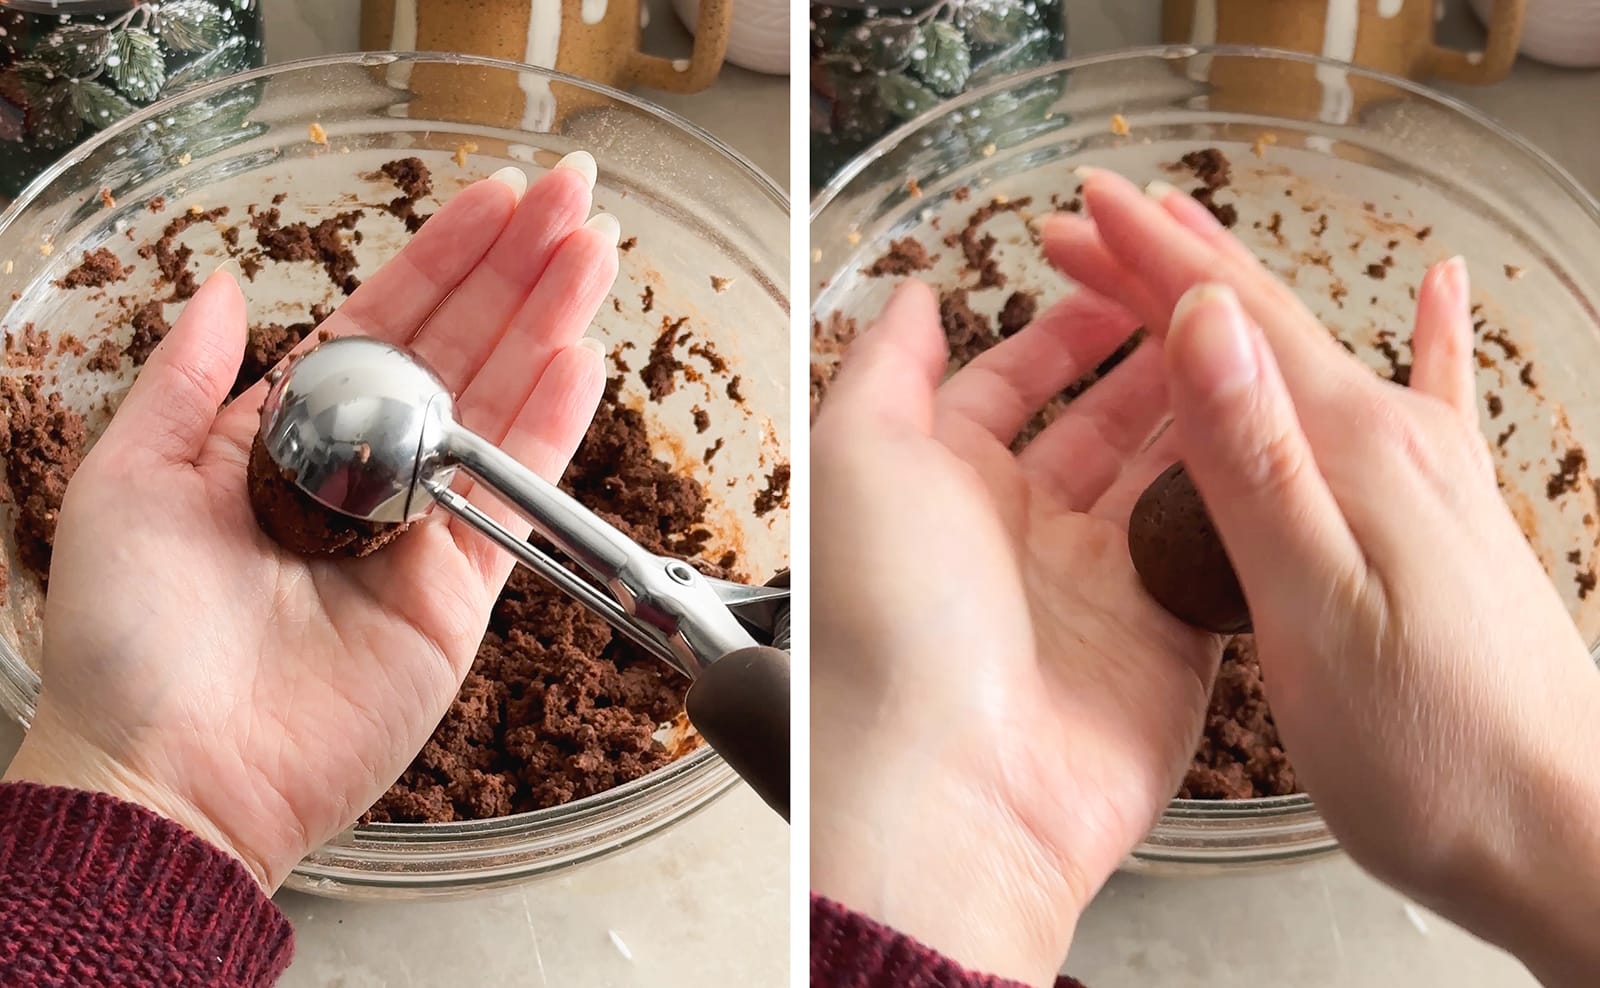 Left to right: releasing cookie dough into a hand from a cookie scoop, rolling cookie dough in between hands.